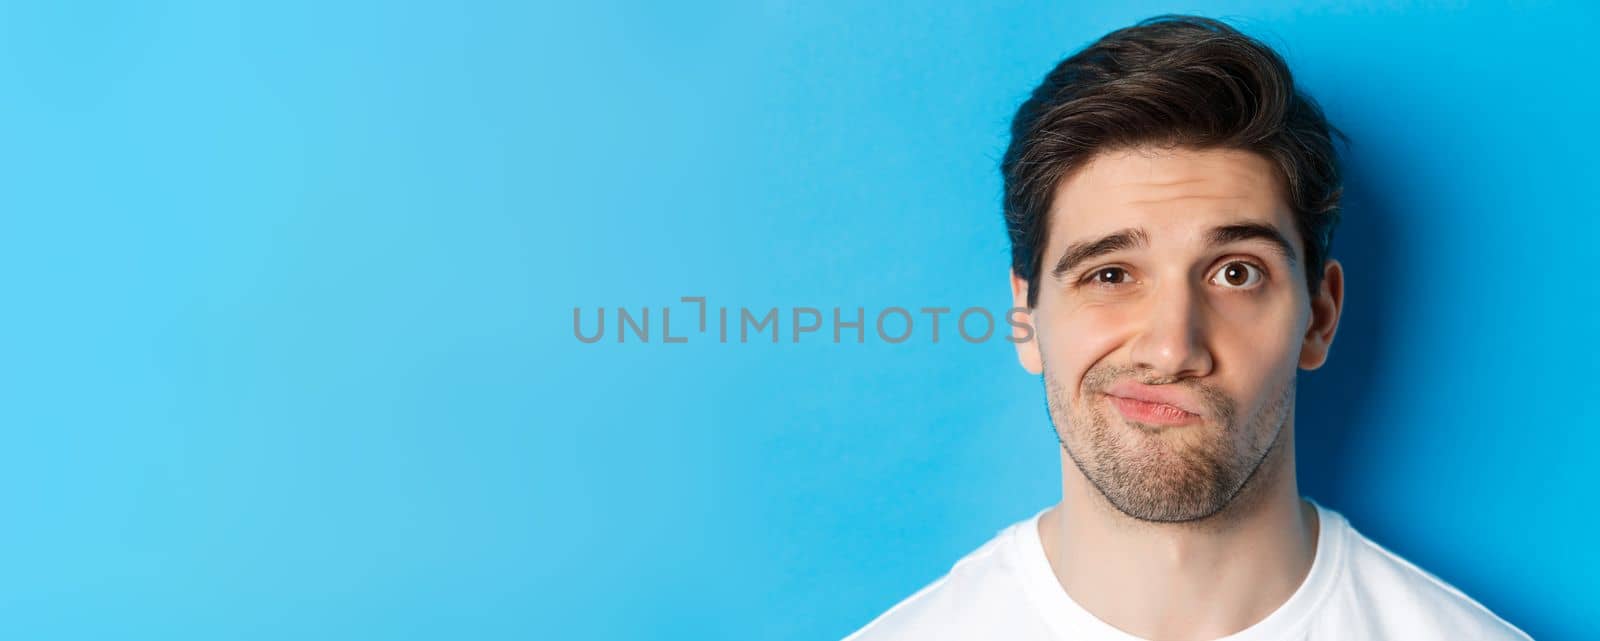 Headshot of skeptical guy looking at something unamusing, grimacing and standing reluctant against blue background by Benzoix